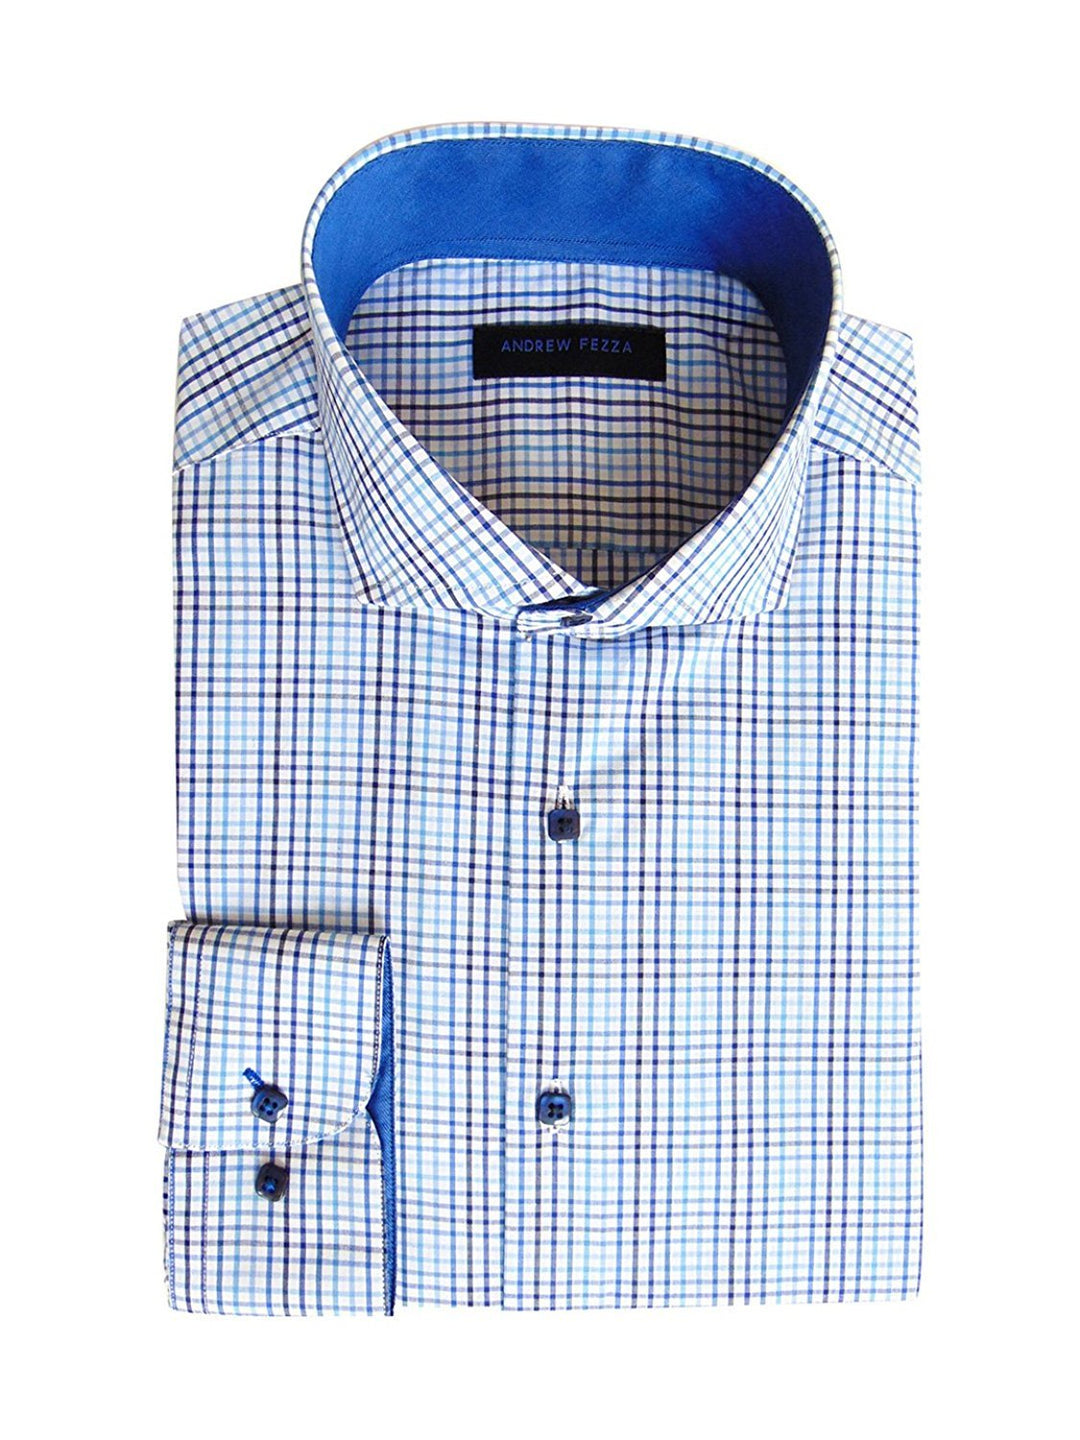 Andrew Fezza Men's Slim Fit Dress Shirt -Available in Many Paterns and Colors